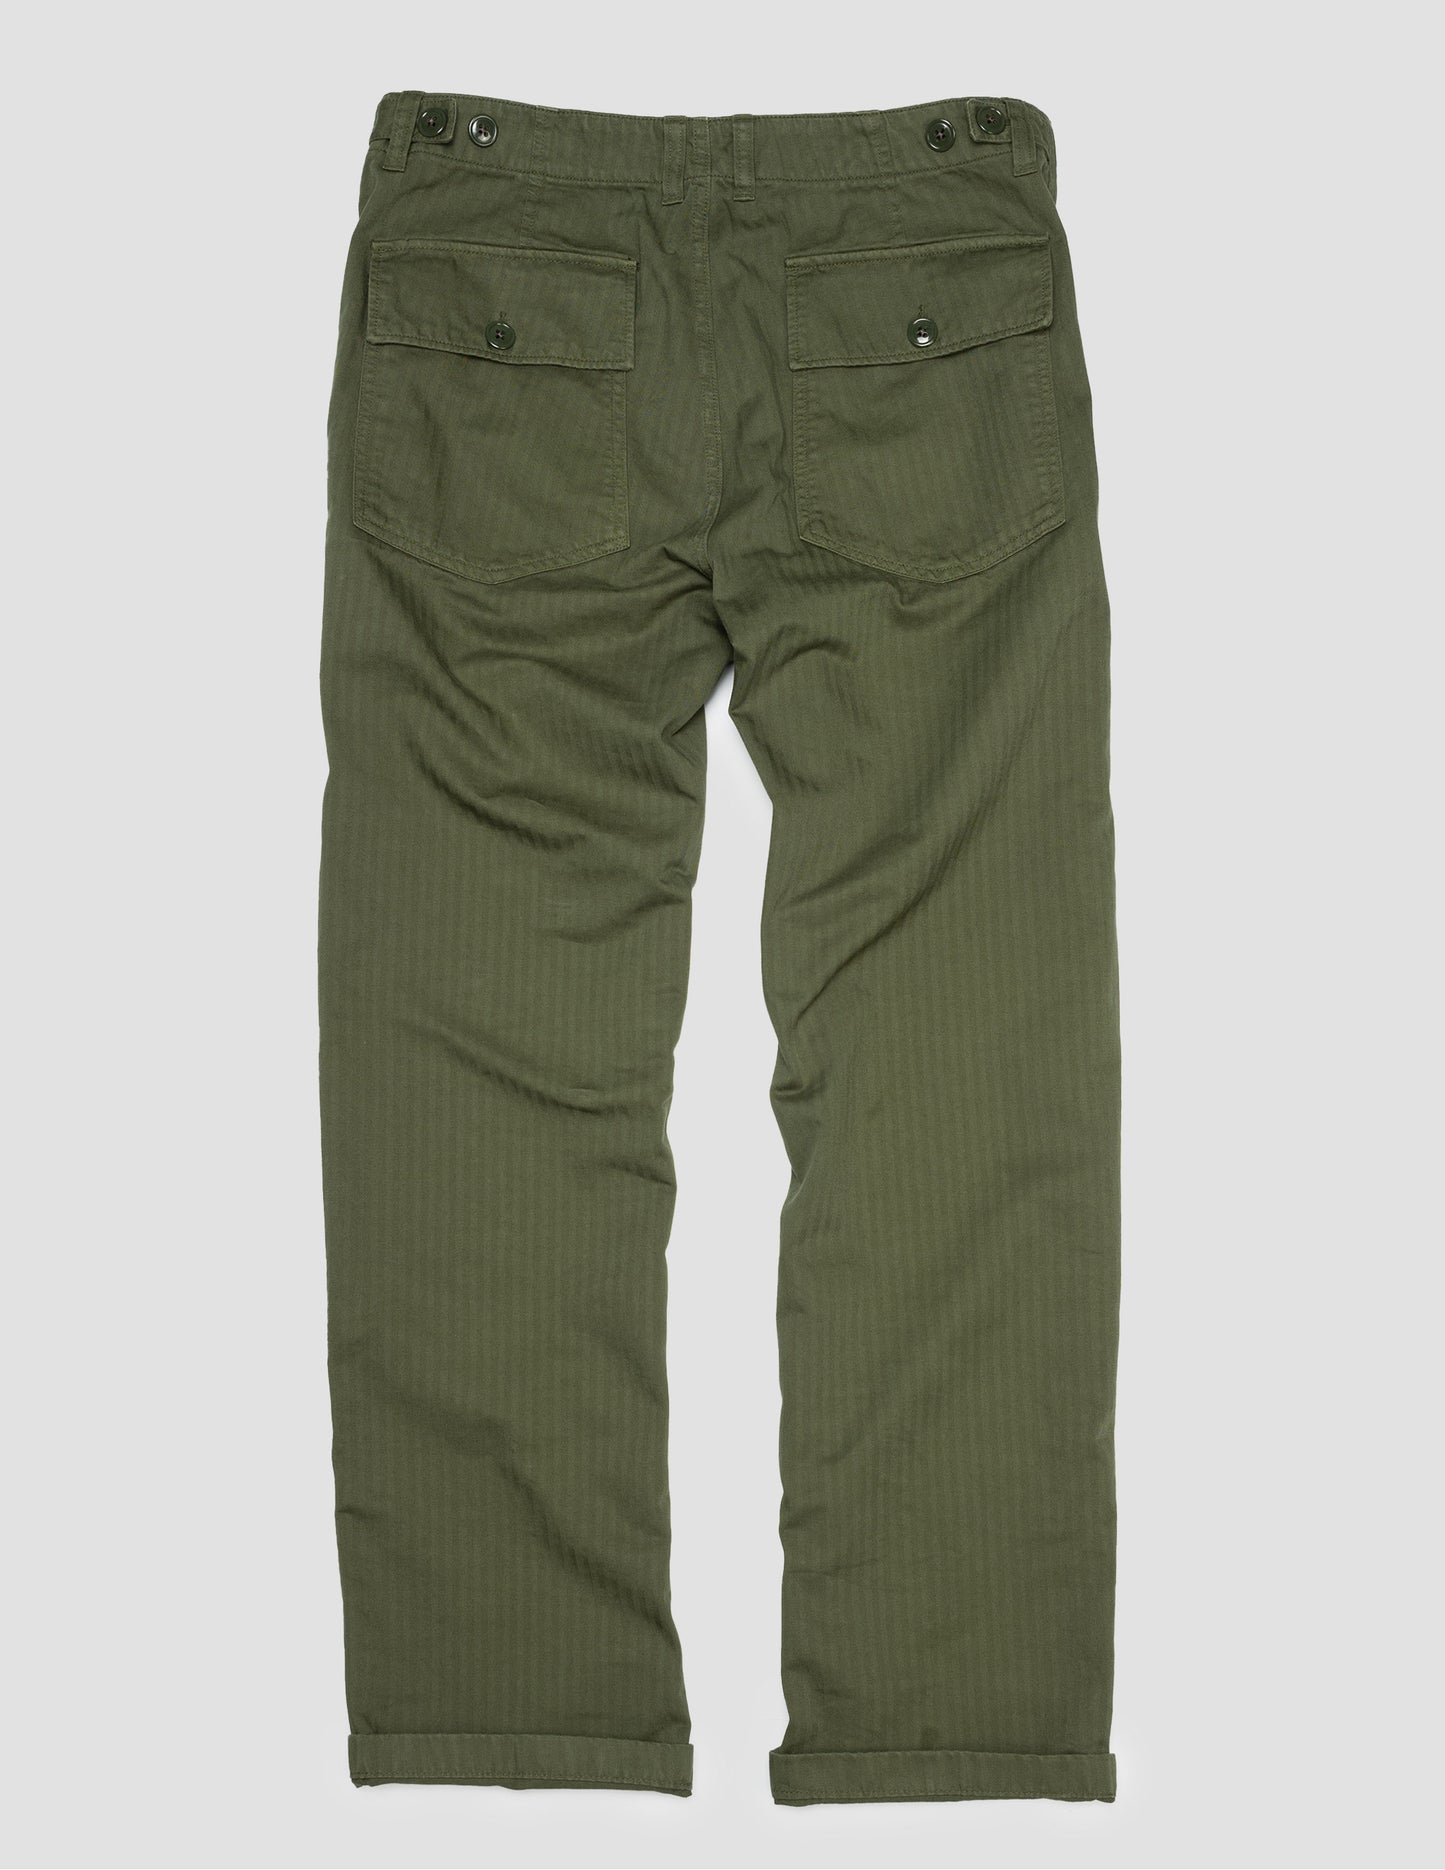 Rivay Series II Garment Dyed Utility Pant in Olive Drab